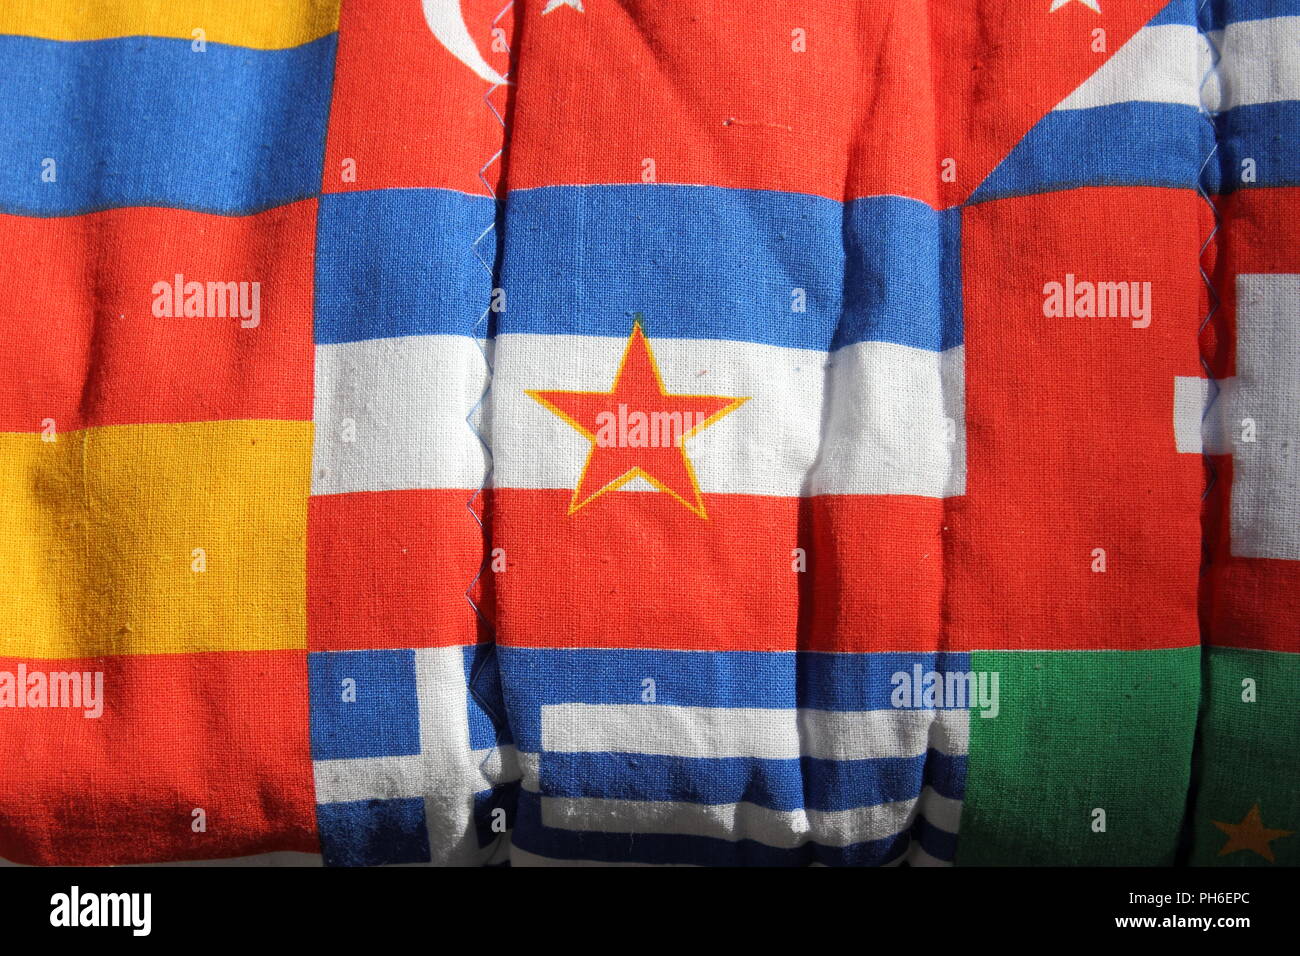 Yugoslavian flag amongst other world flags on an old flag patterned sleeping bag. Stock Photo